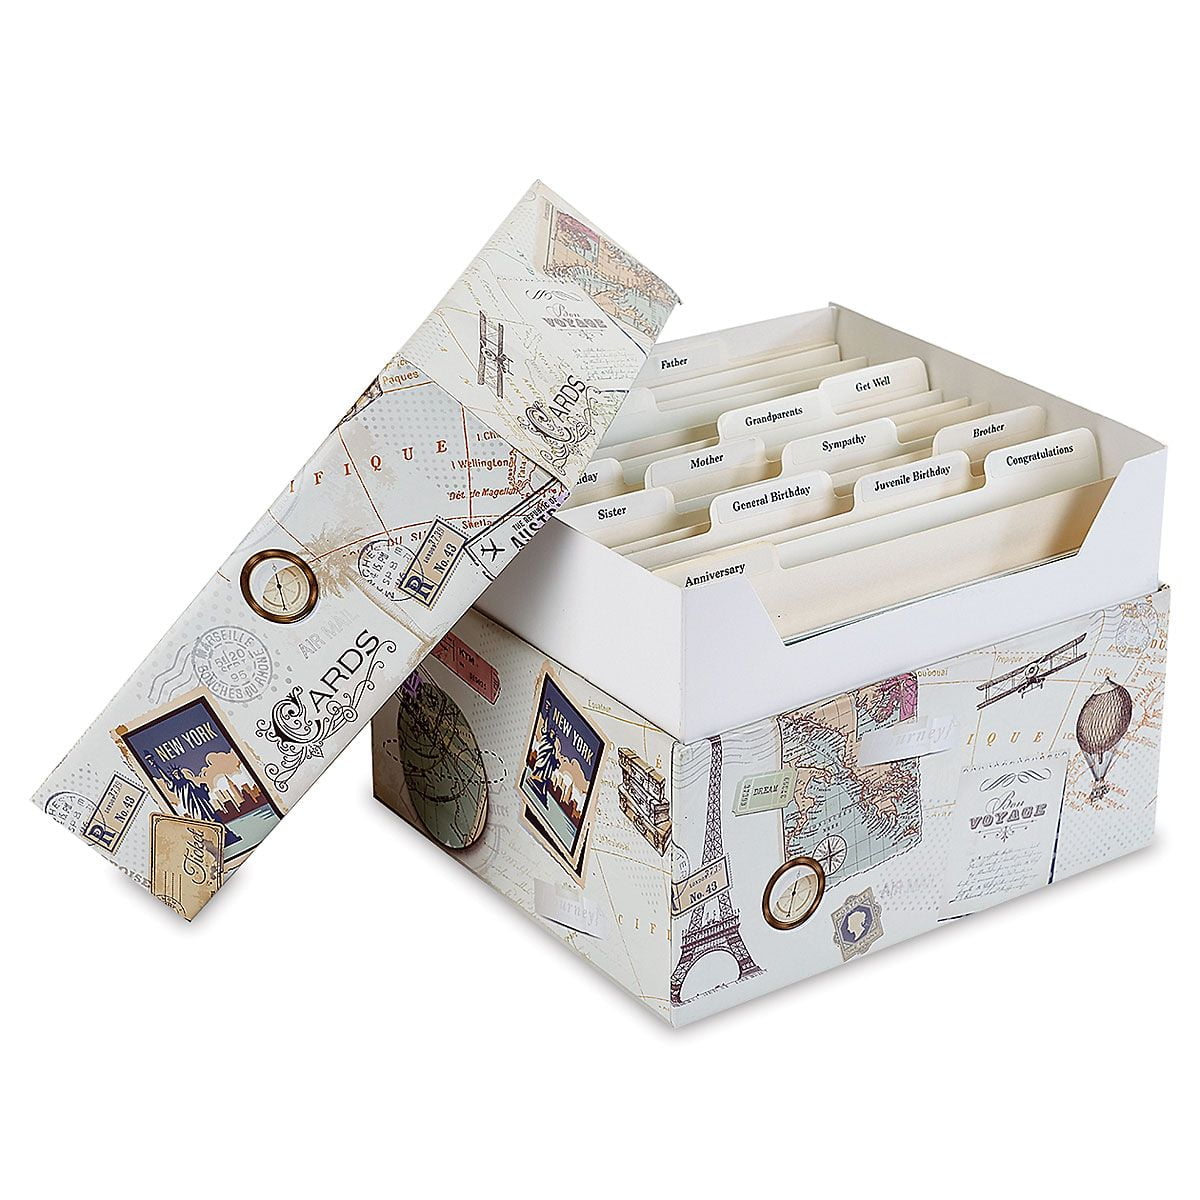 100 All Occasion Cards Assortment Box with Envelopes and Stickers - Large  5x7 Inch Bulk Blank Inside Greeting Notes, 100 Unique Designs in a Sturdy Card  Organizer Box — T&M Quality Designs